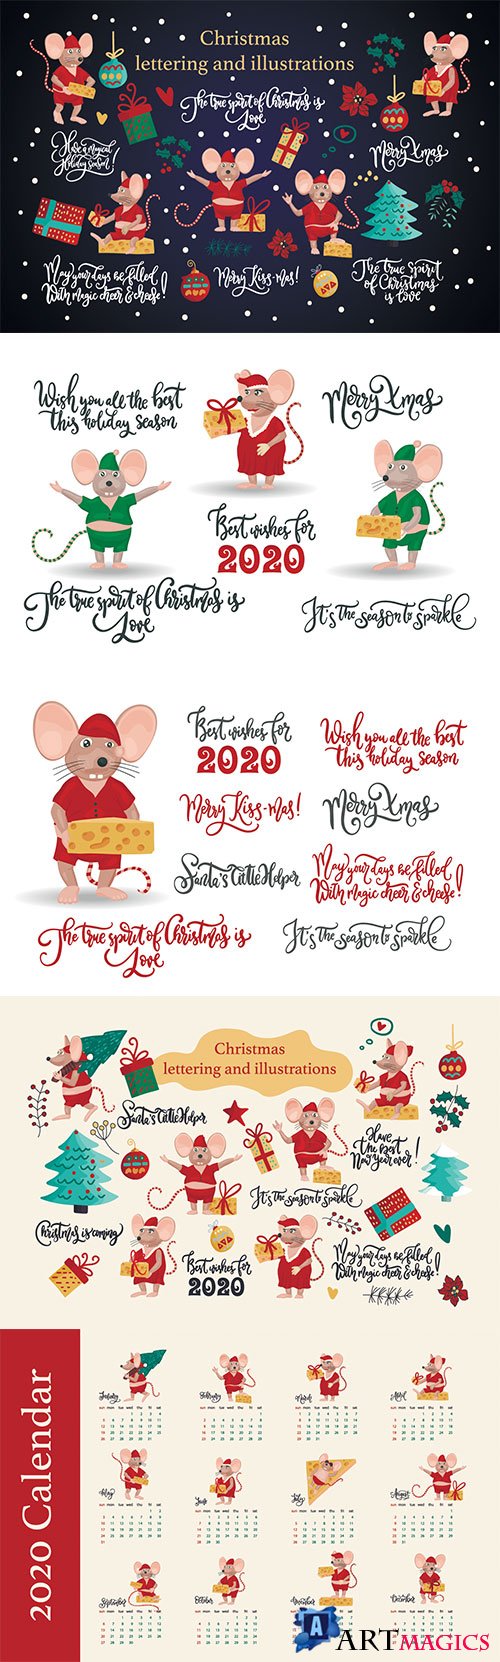 Christmas greeting illustrations with cute mice, decorations and lettering quotes